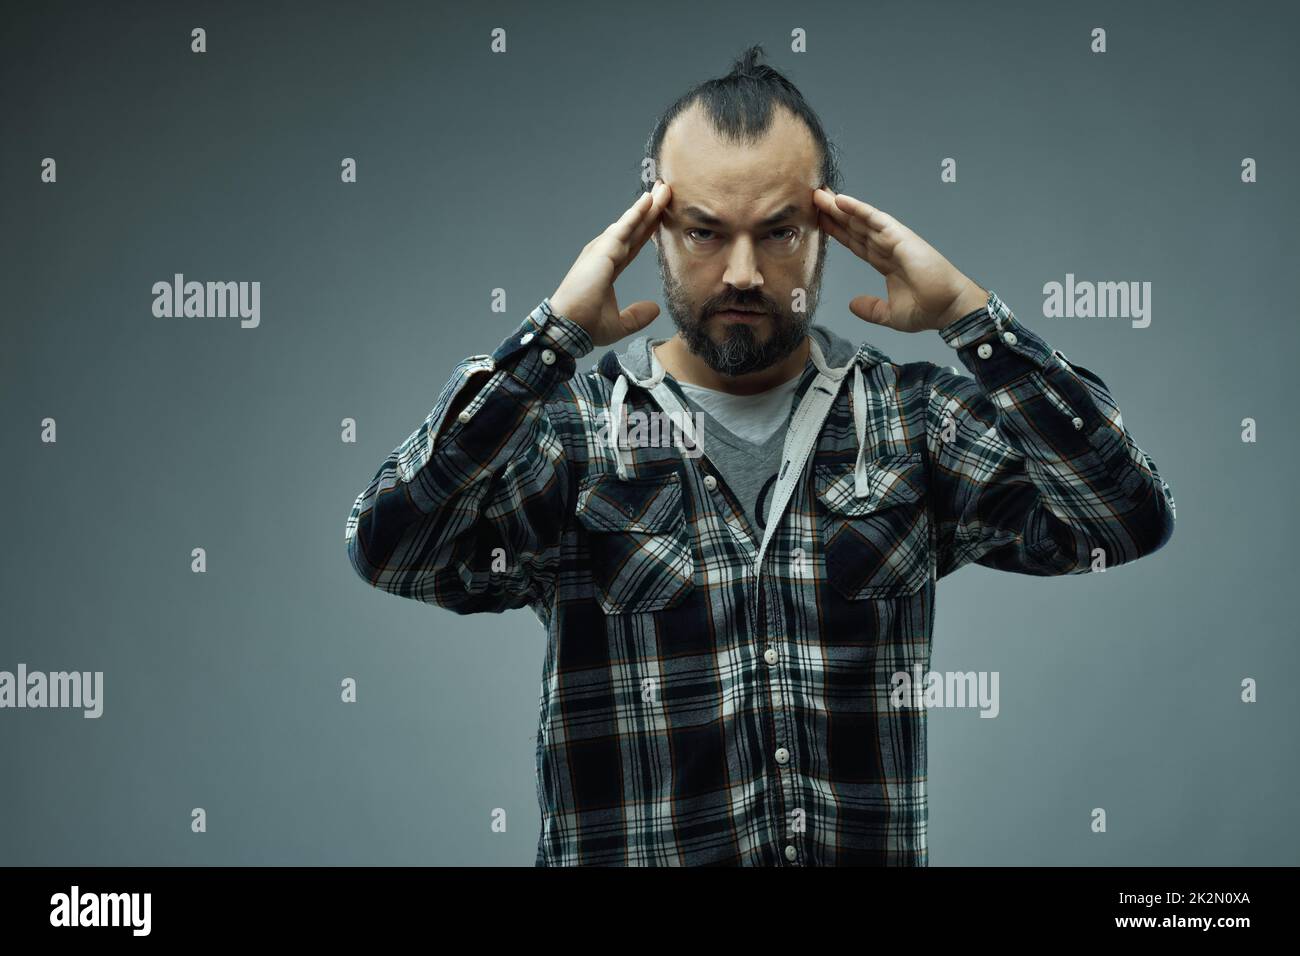 Man staring intently at the camera with frown of concentration Stock Photo